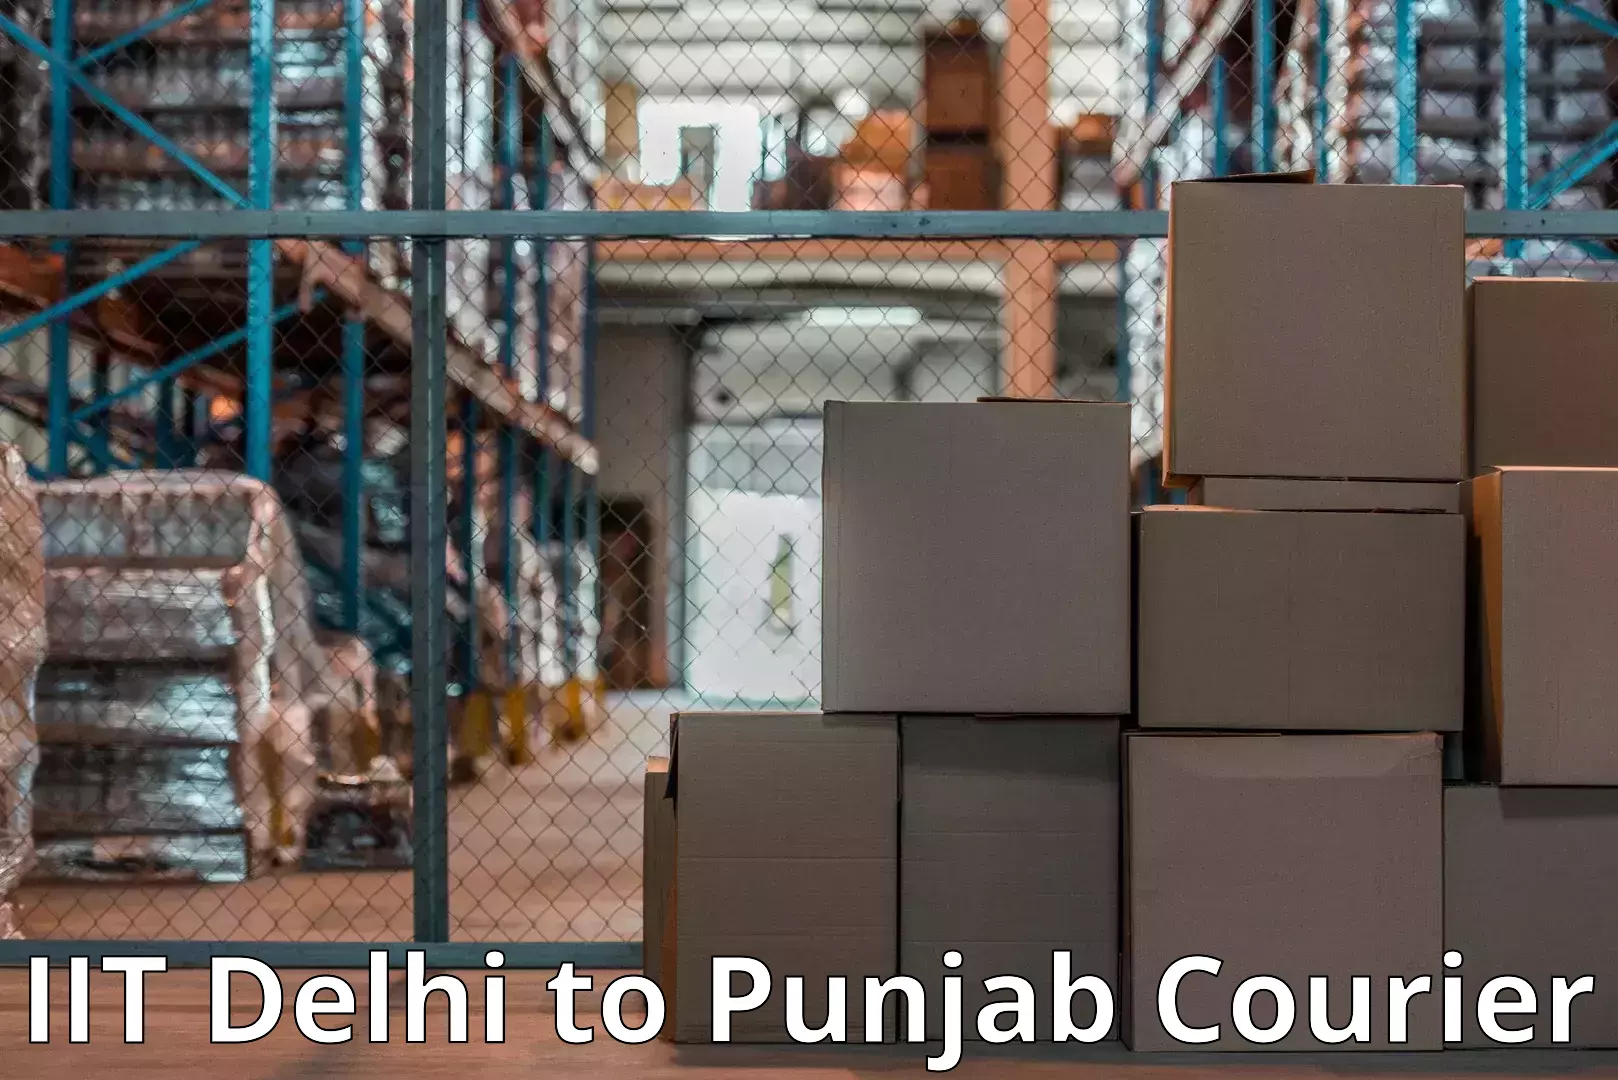 Affordable moving services IIT Delhi to Punjab